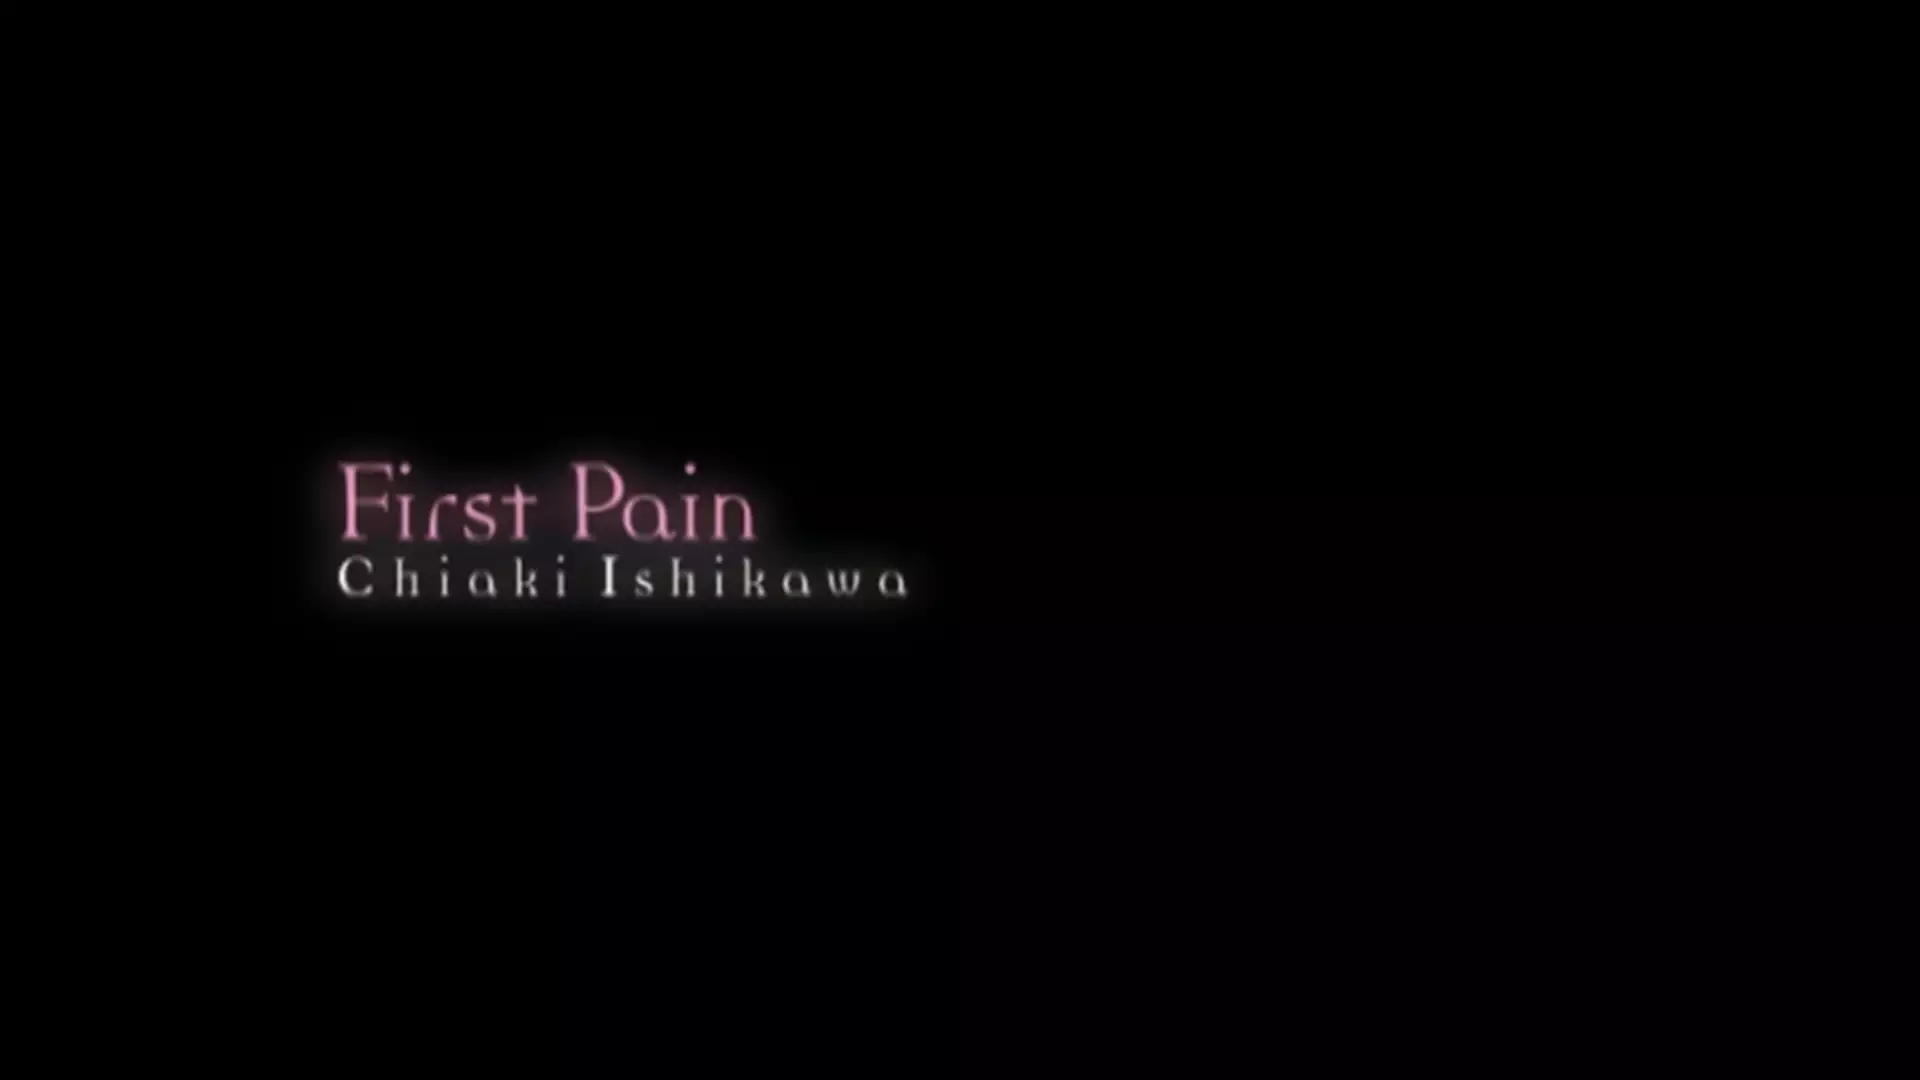 First Pain